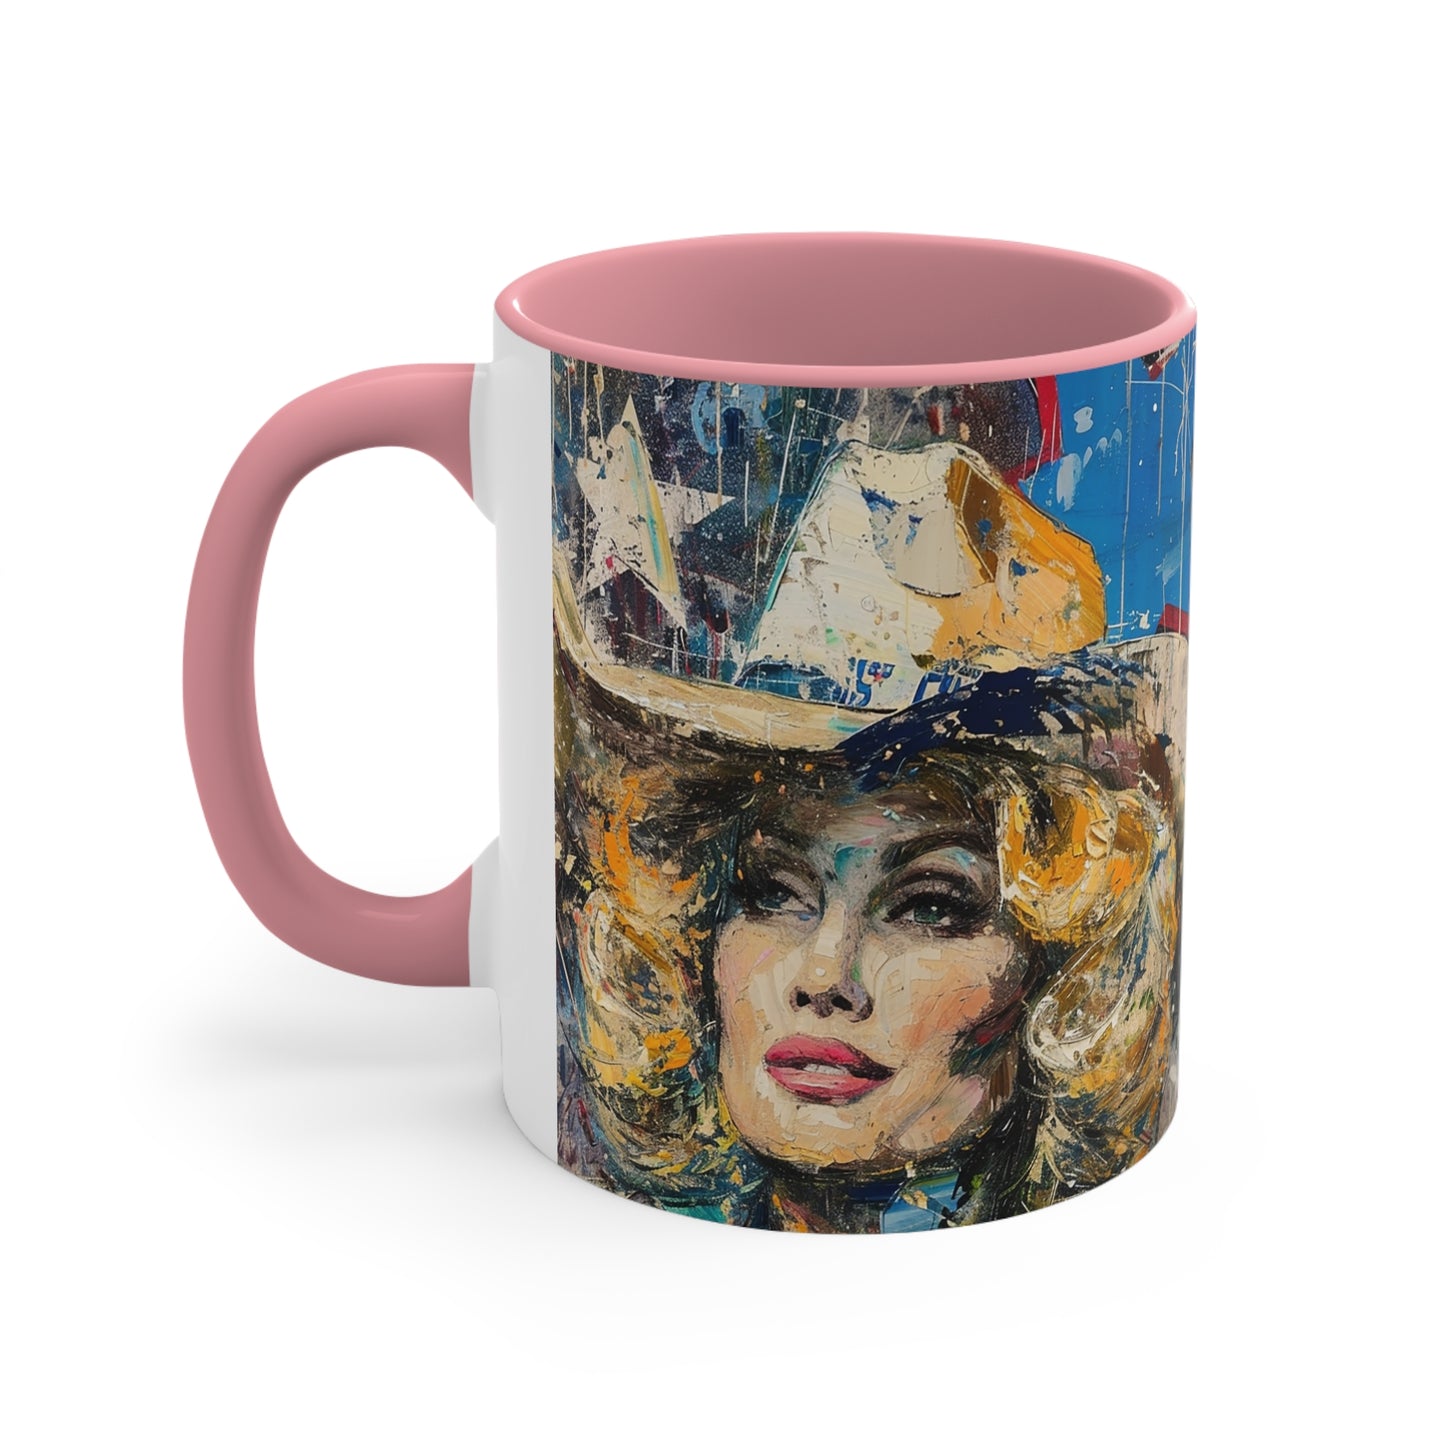 Accent Coffee Mug, 11oz - Country Queen pink side